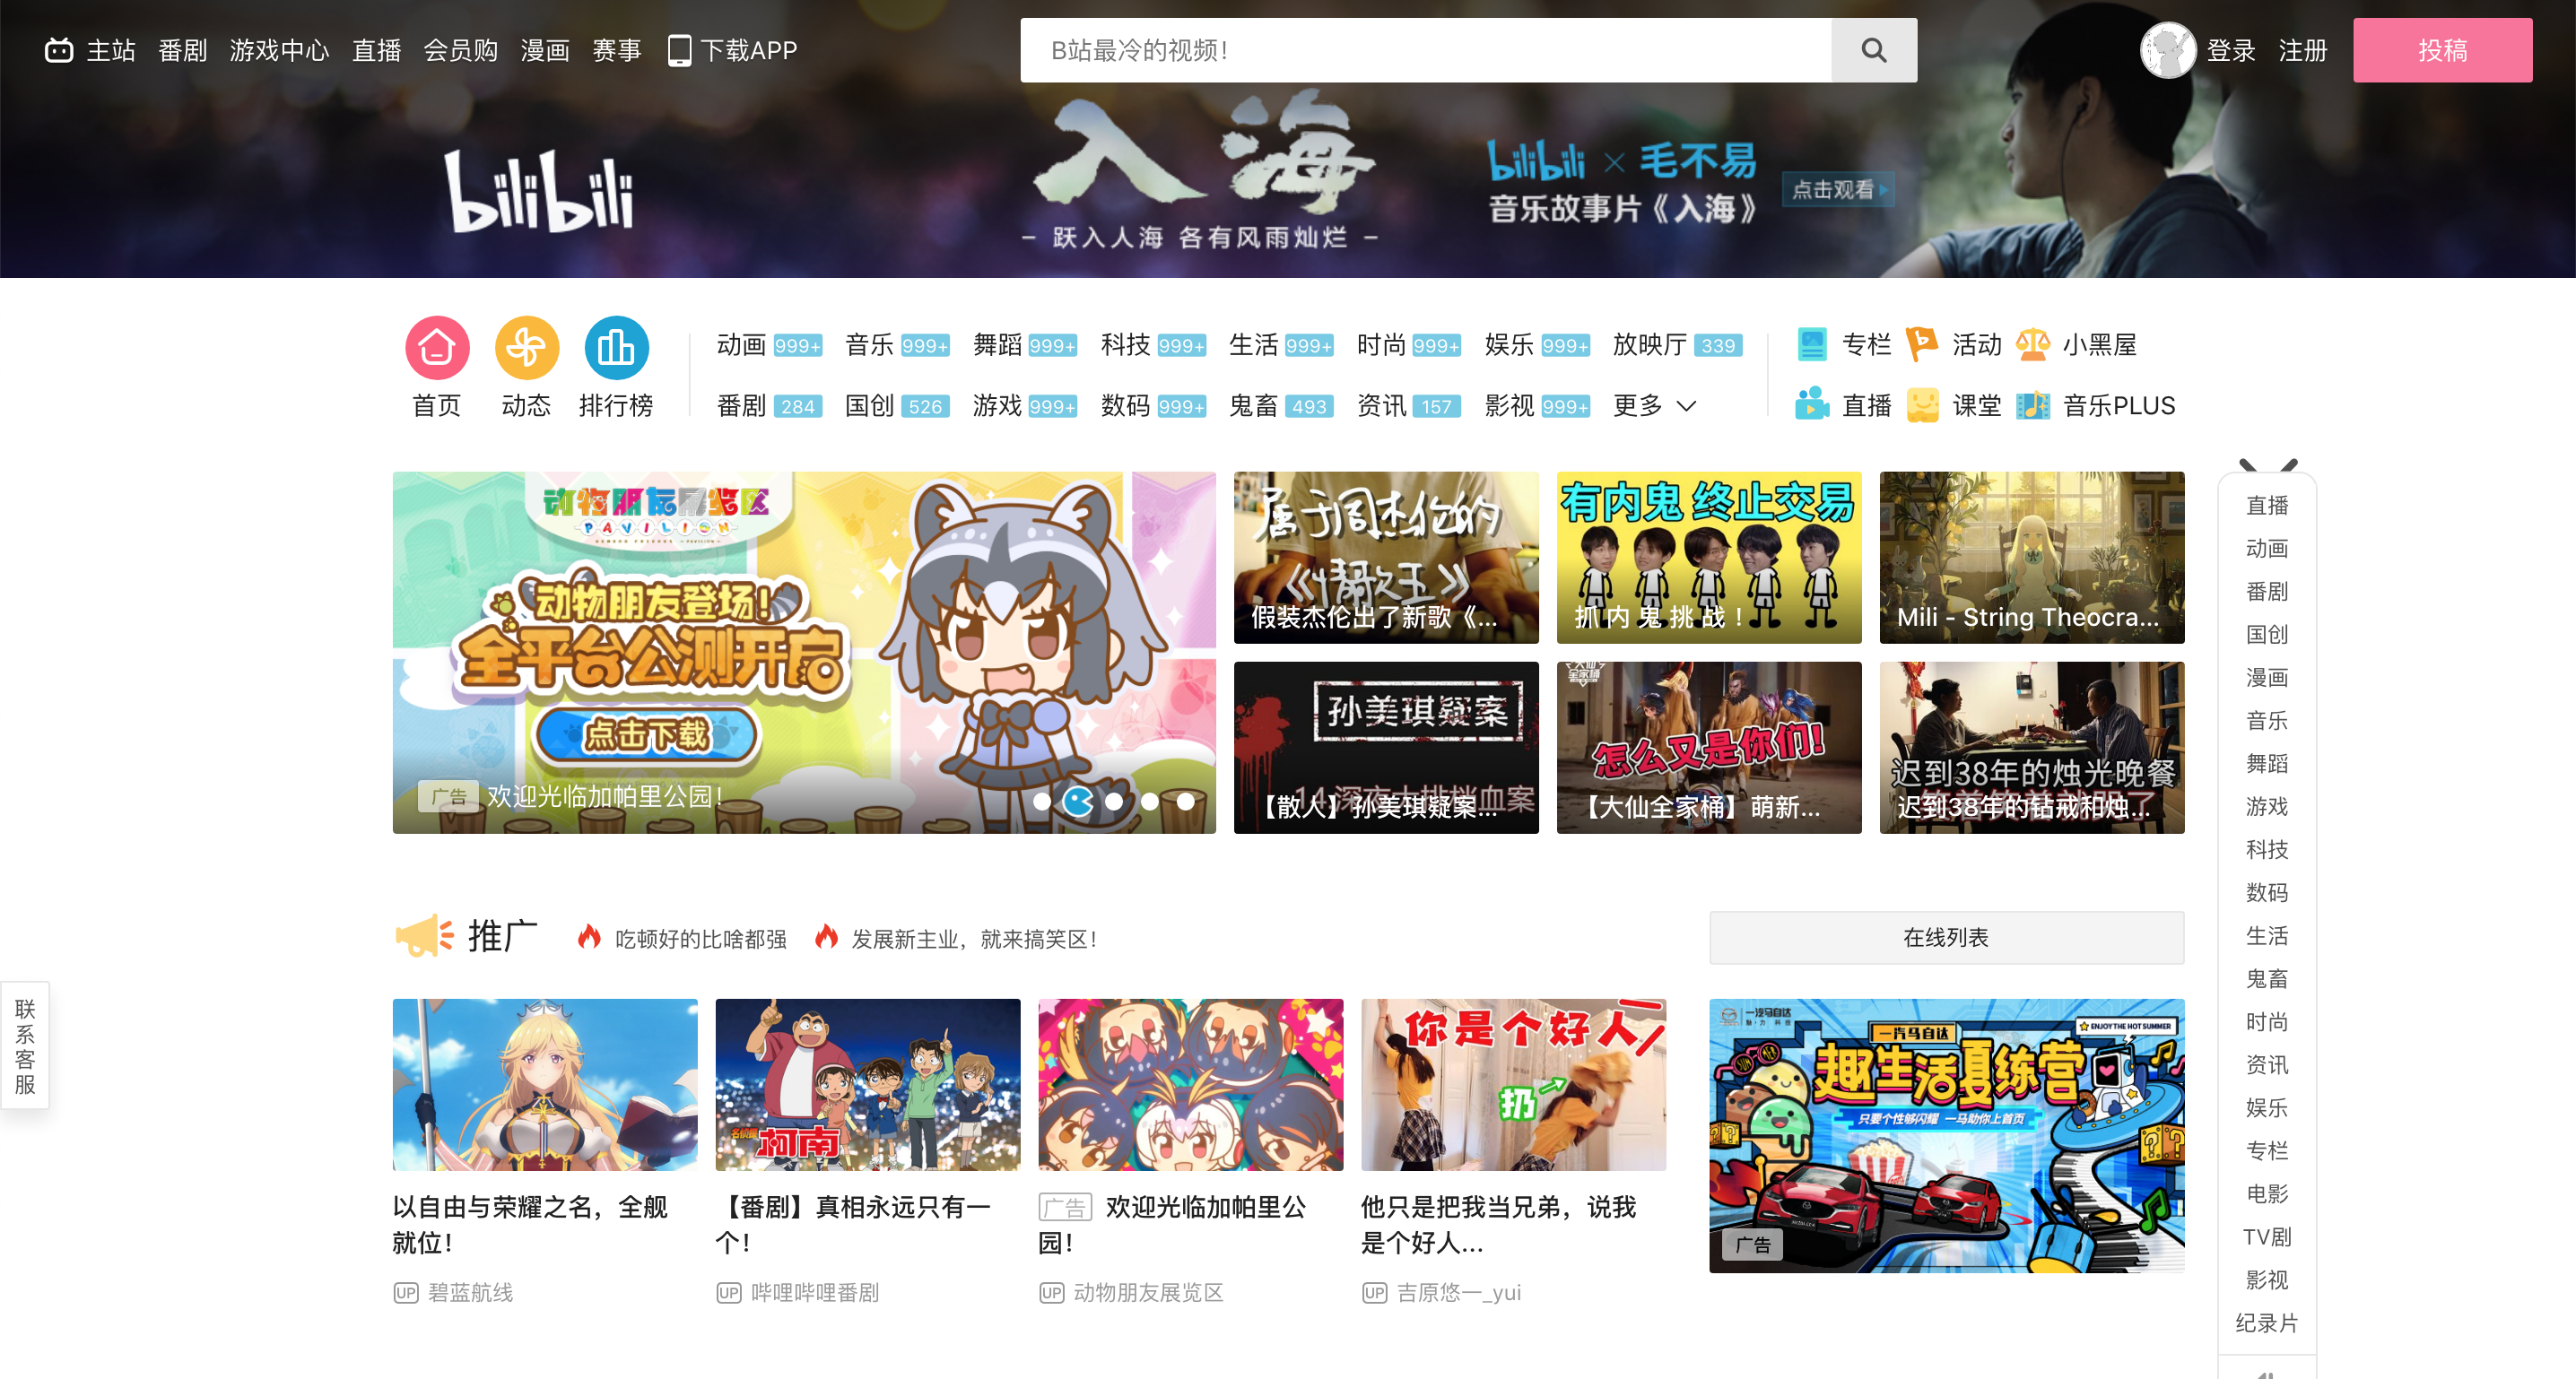 China’s video streaming platform Bilibili boast staggering numbers